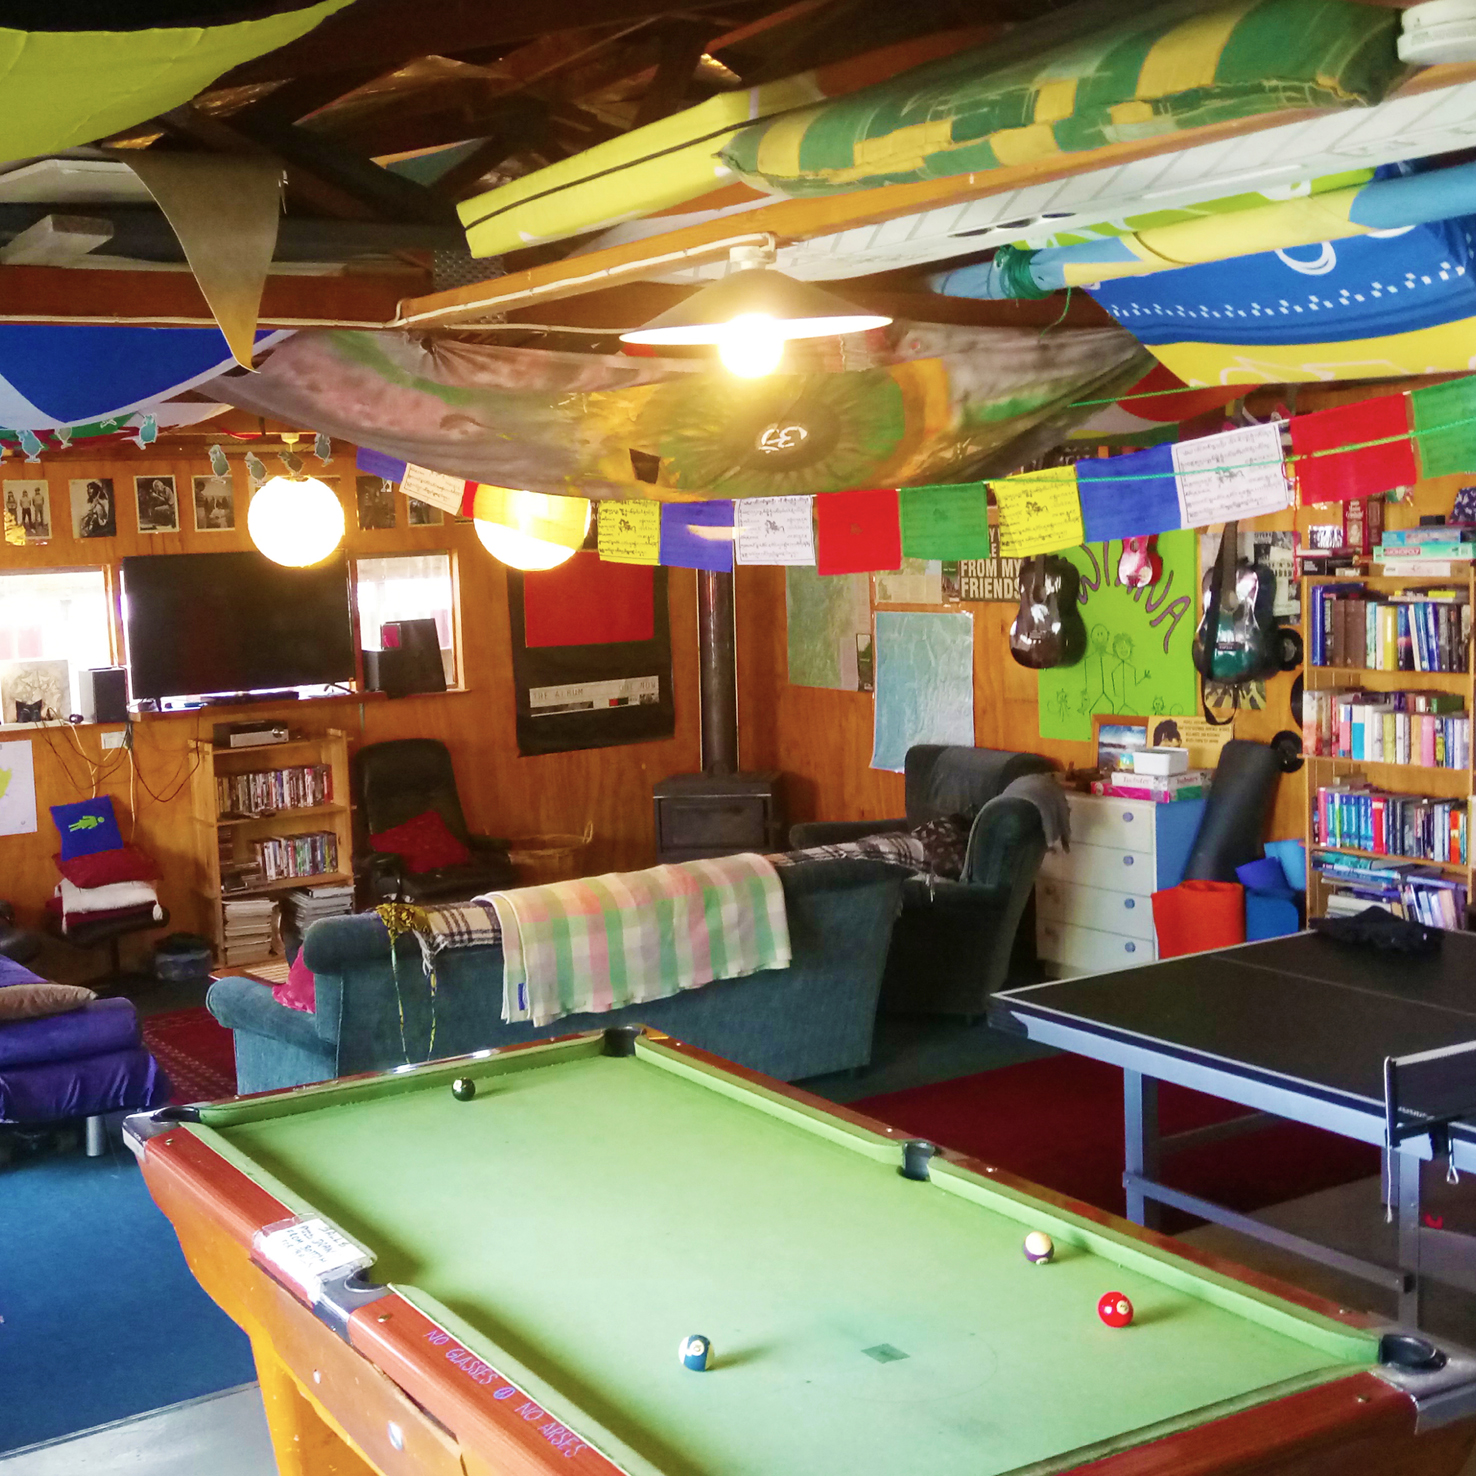 Entertainment lounge with pool table and table tennis